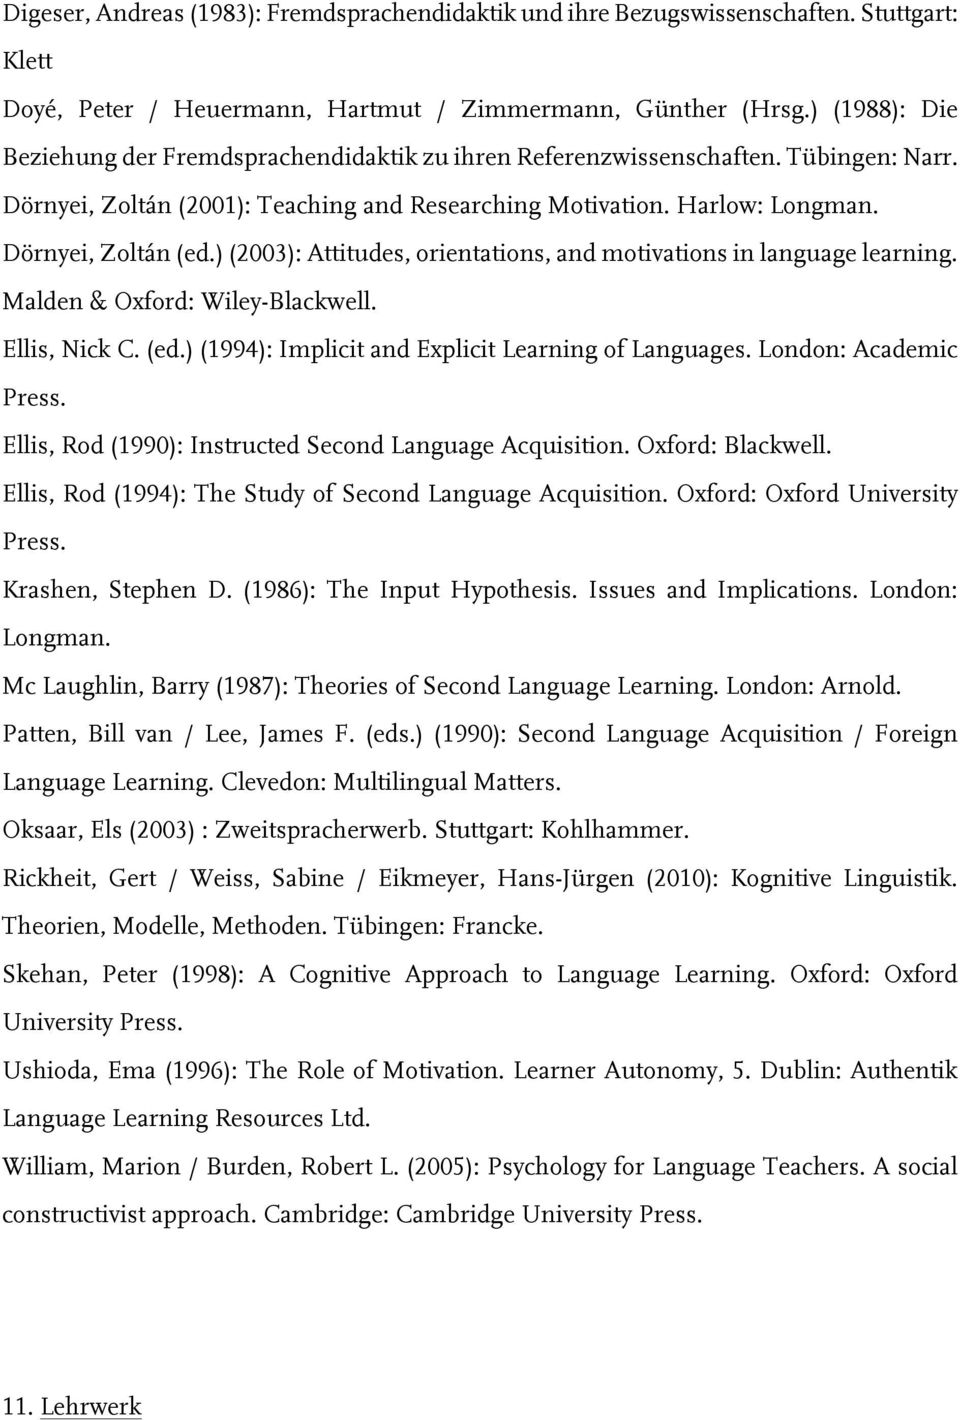 ) (2003): Attitudes, orientations, and motivations in language learning. Malden & Oxford: Wiley-Blackwell. Ellis, Nick C. (ed.) (1994): Implicit and Explicit Learning of Languages.